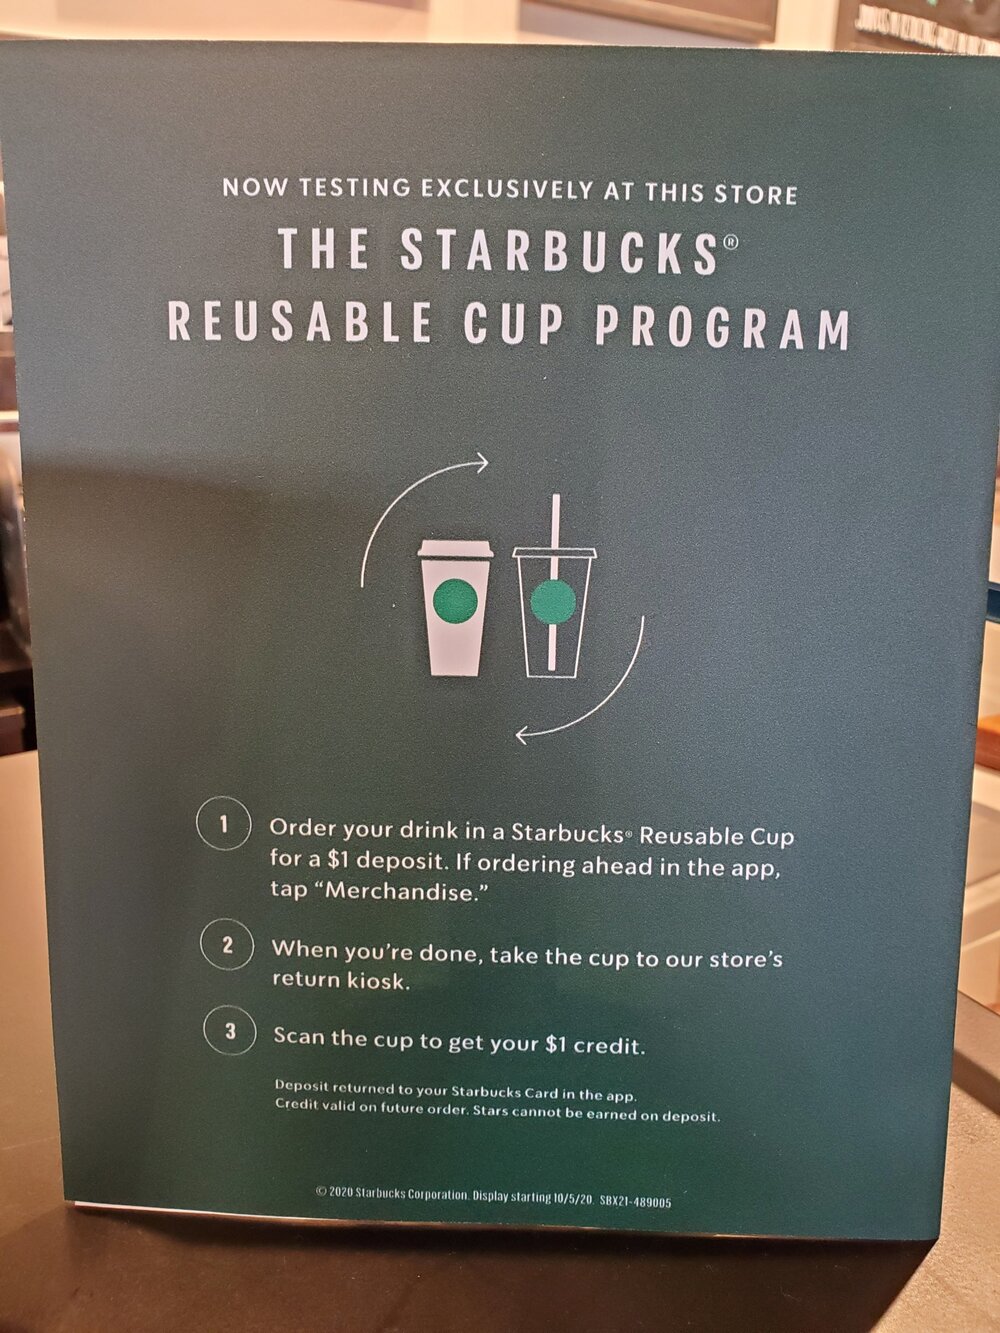 Starbucks reusable cup giveaway returns, here's what you need to know